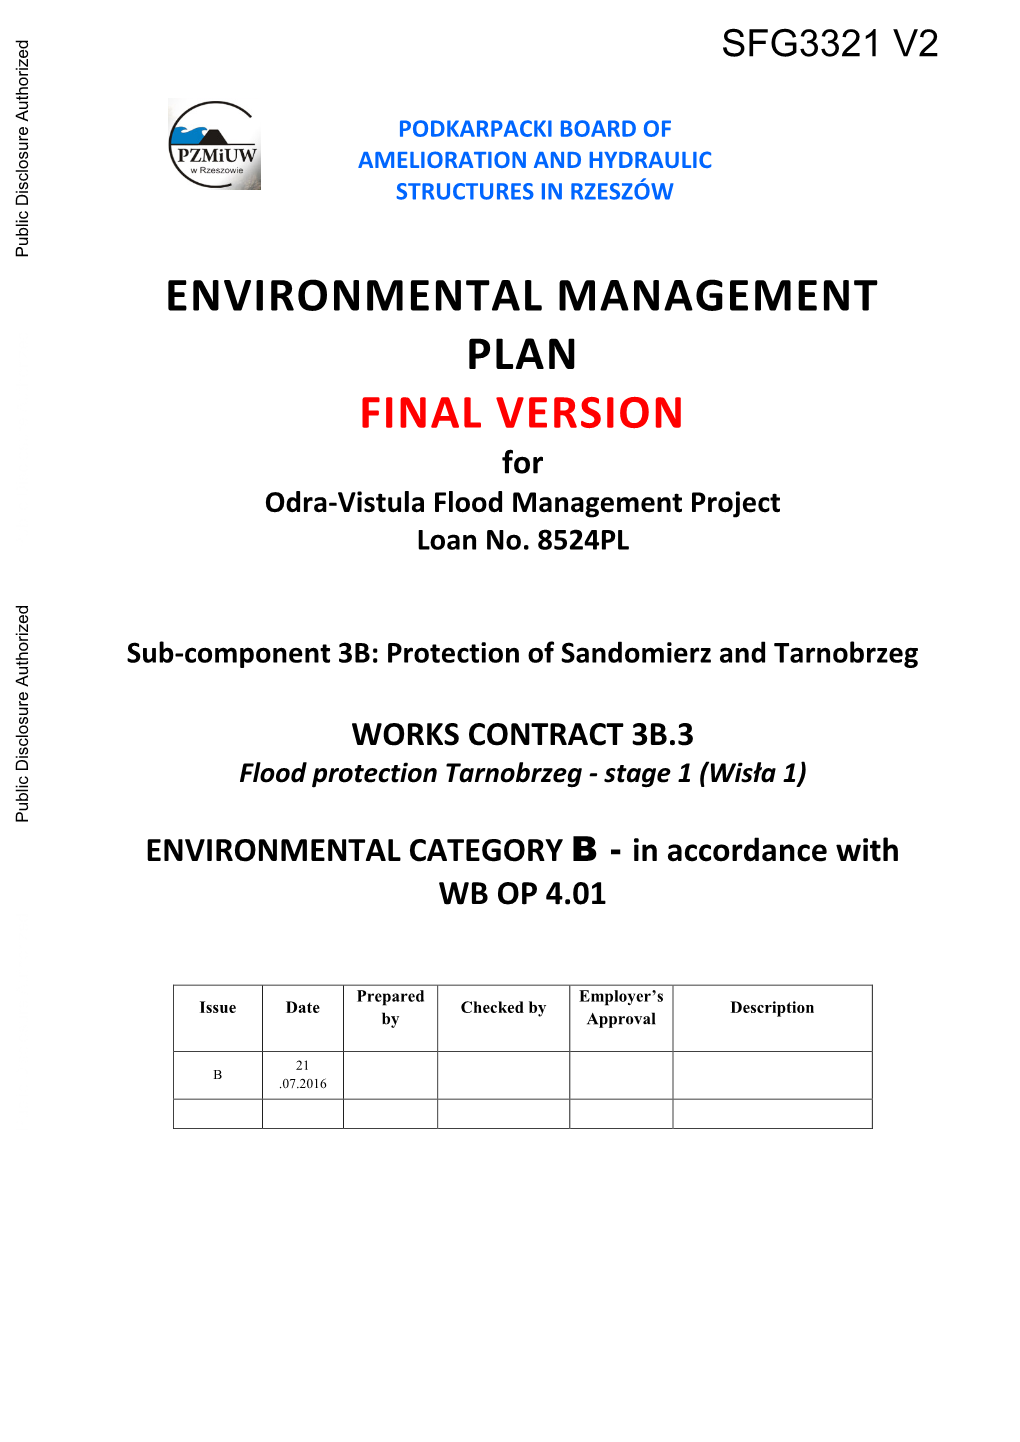 ENVIRONMENTAL CATEGORY B - in Accordance with WB OP 4.01